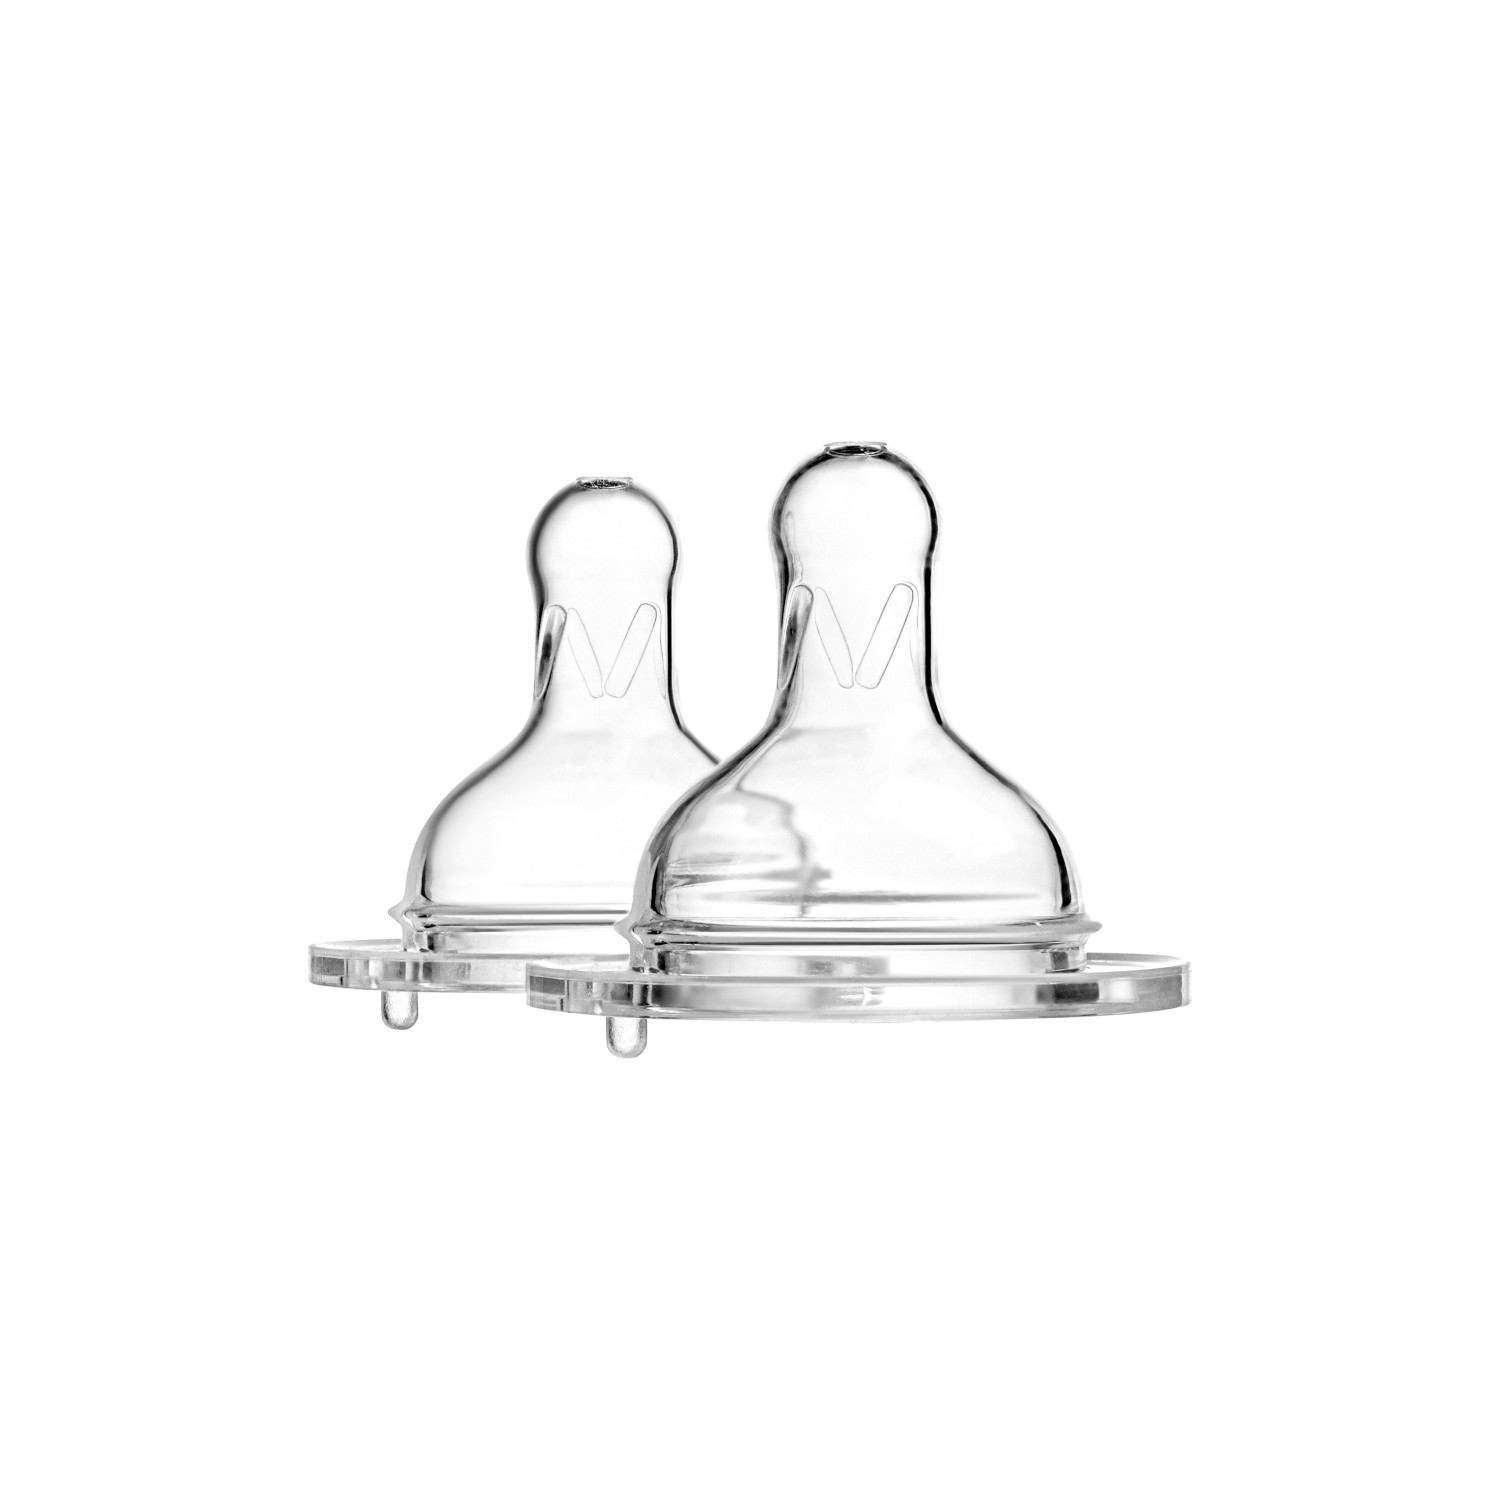 Anti-colic teat A0120  for wide neck bottle A0107